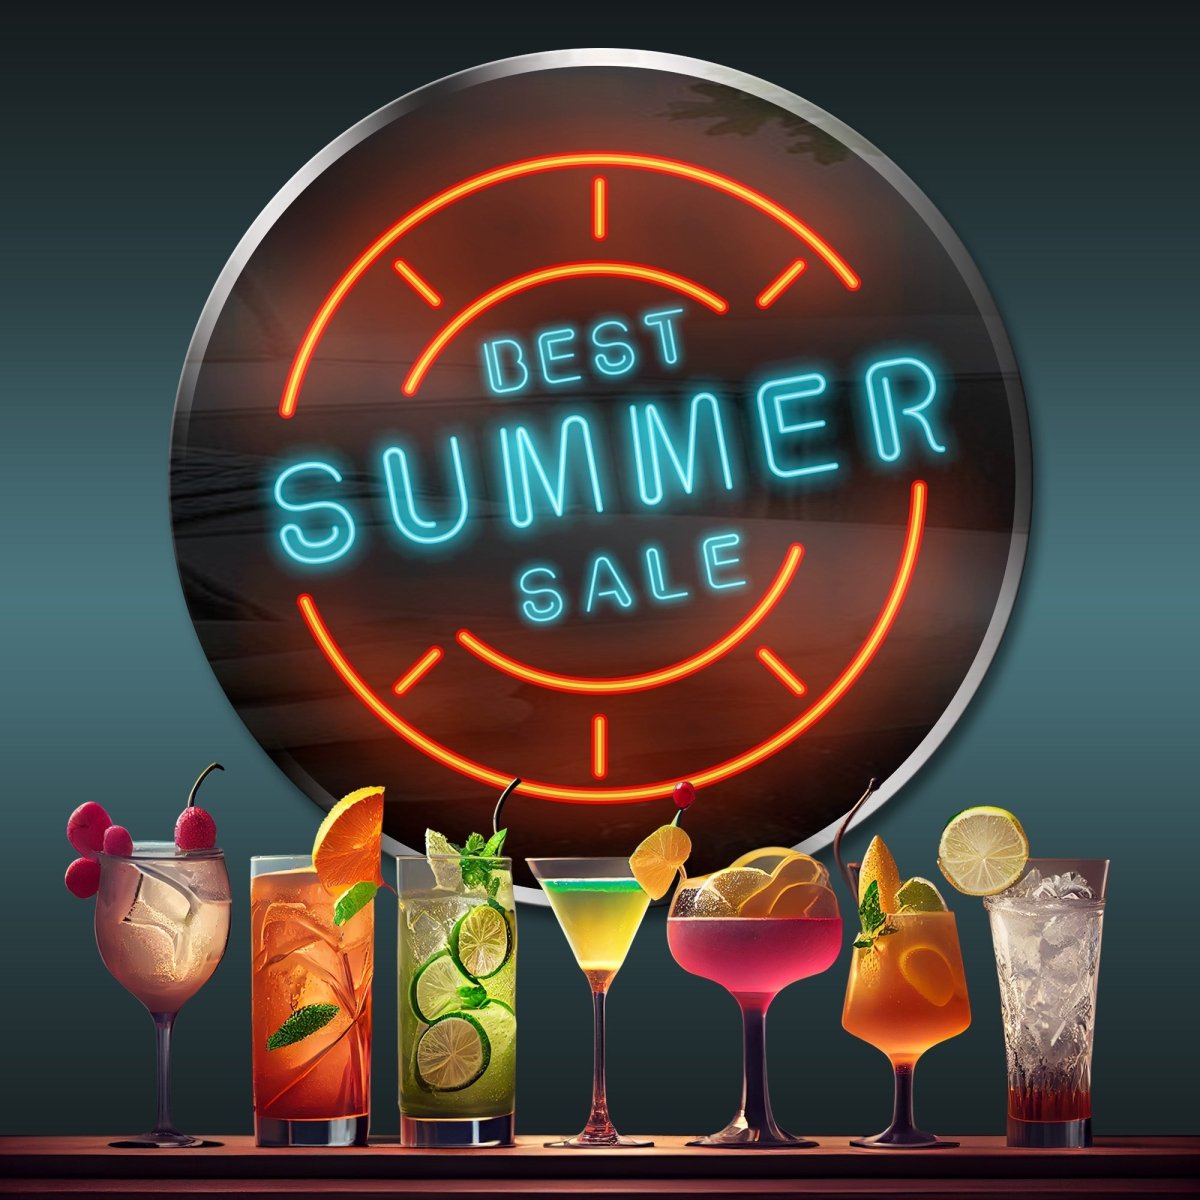 Personalized Neon Sign Best Summer Sale 3 - madaboutneon